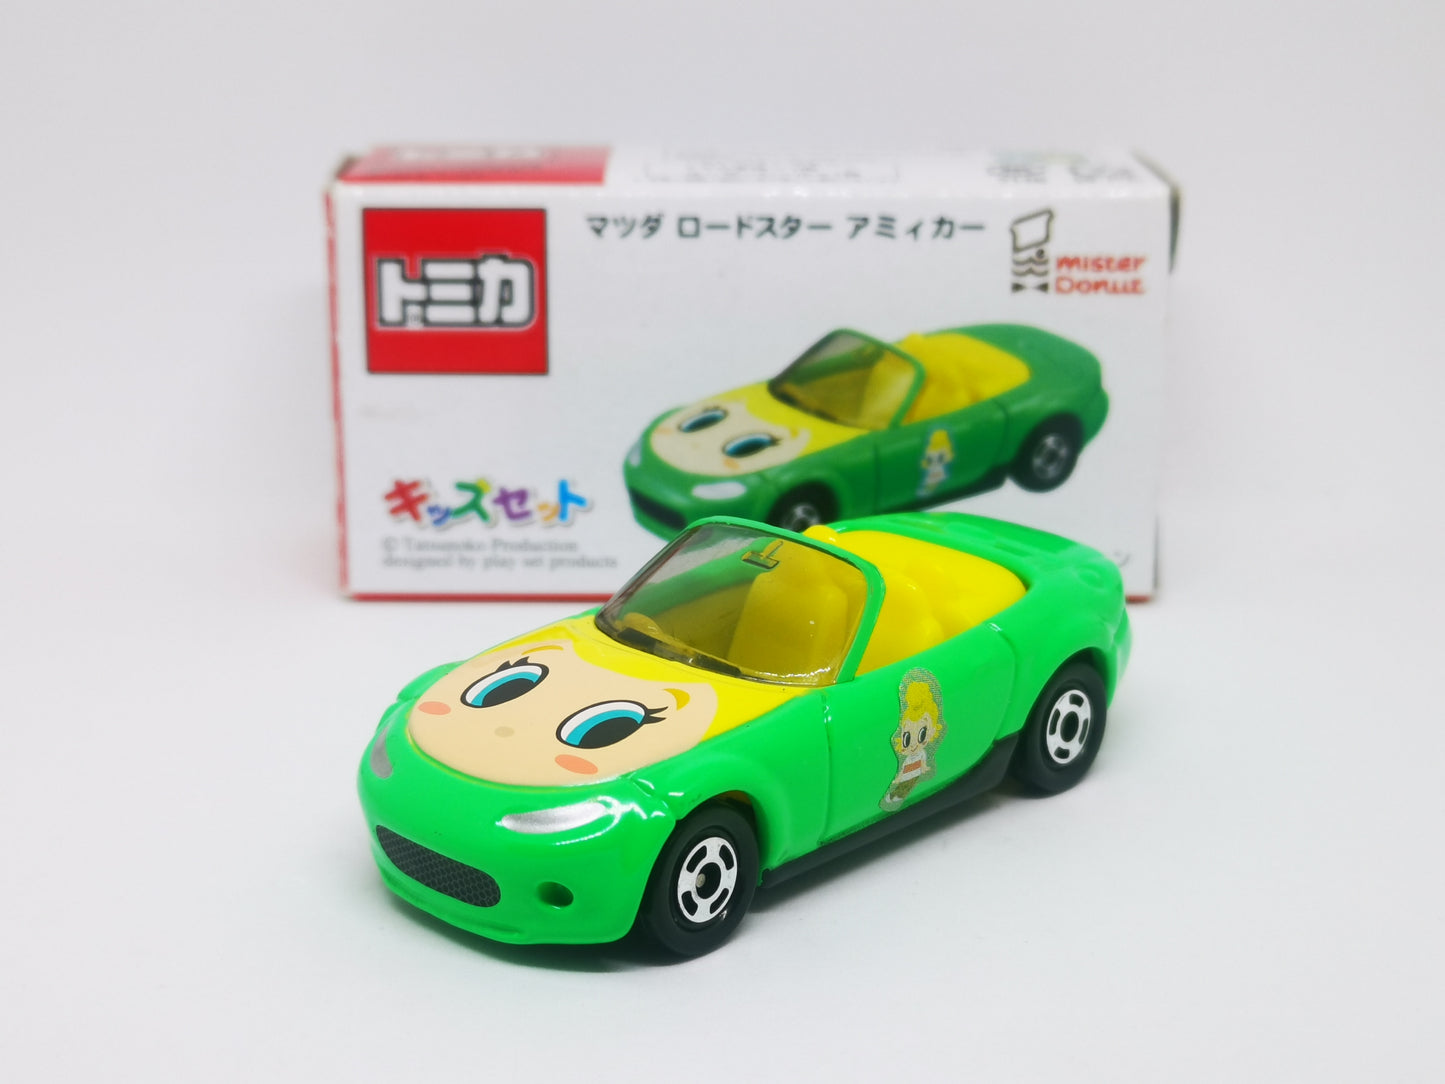 Tomica X Mister Donut exclusive Mazda MX-5 Roadster NC